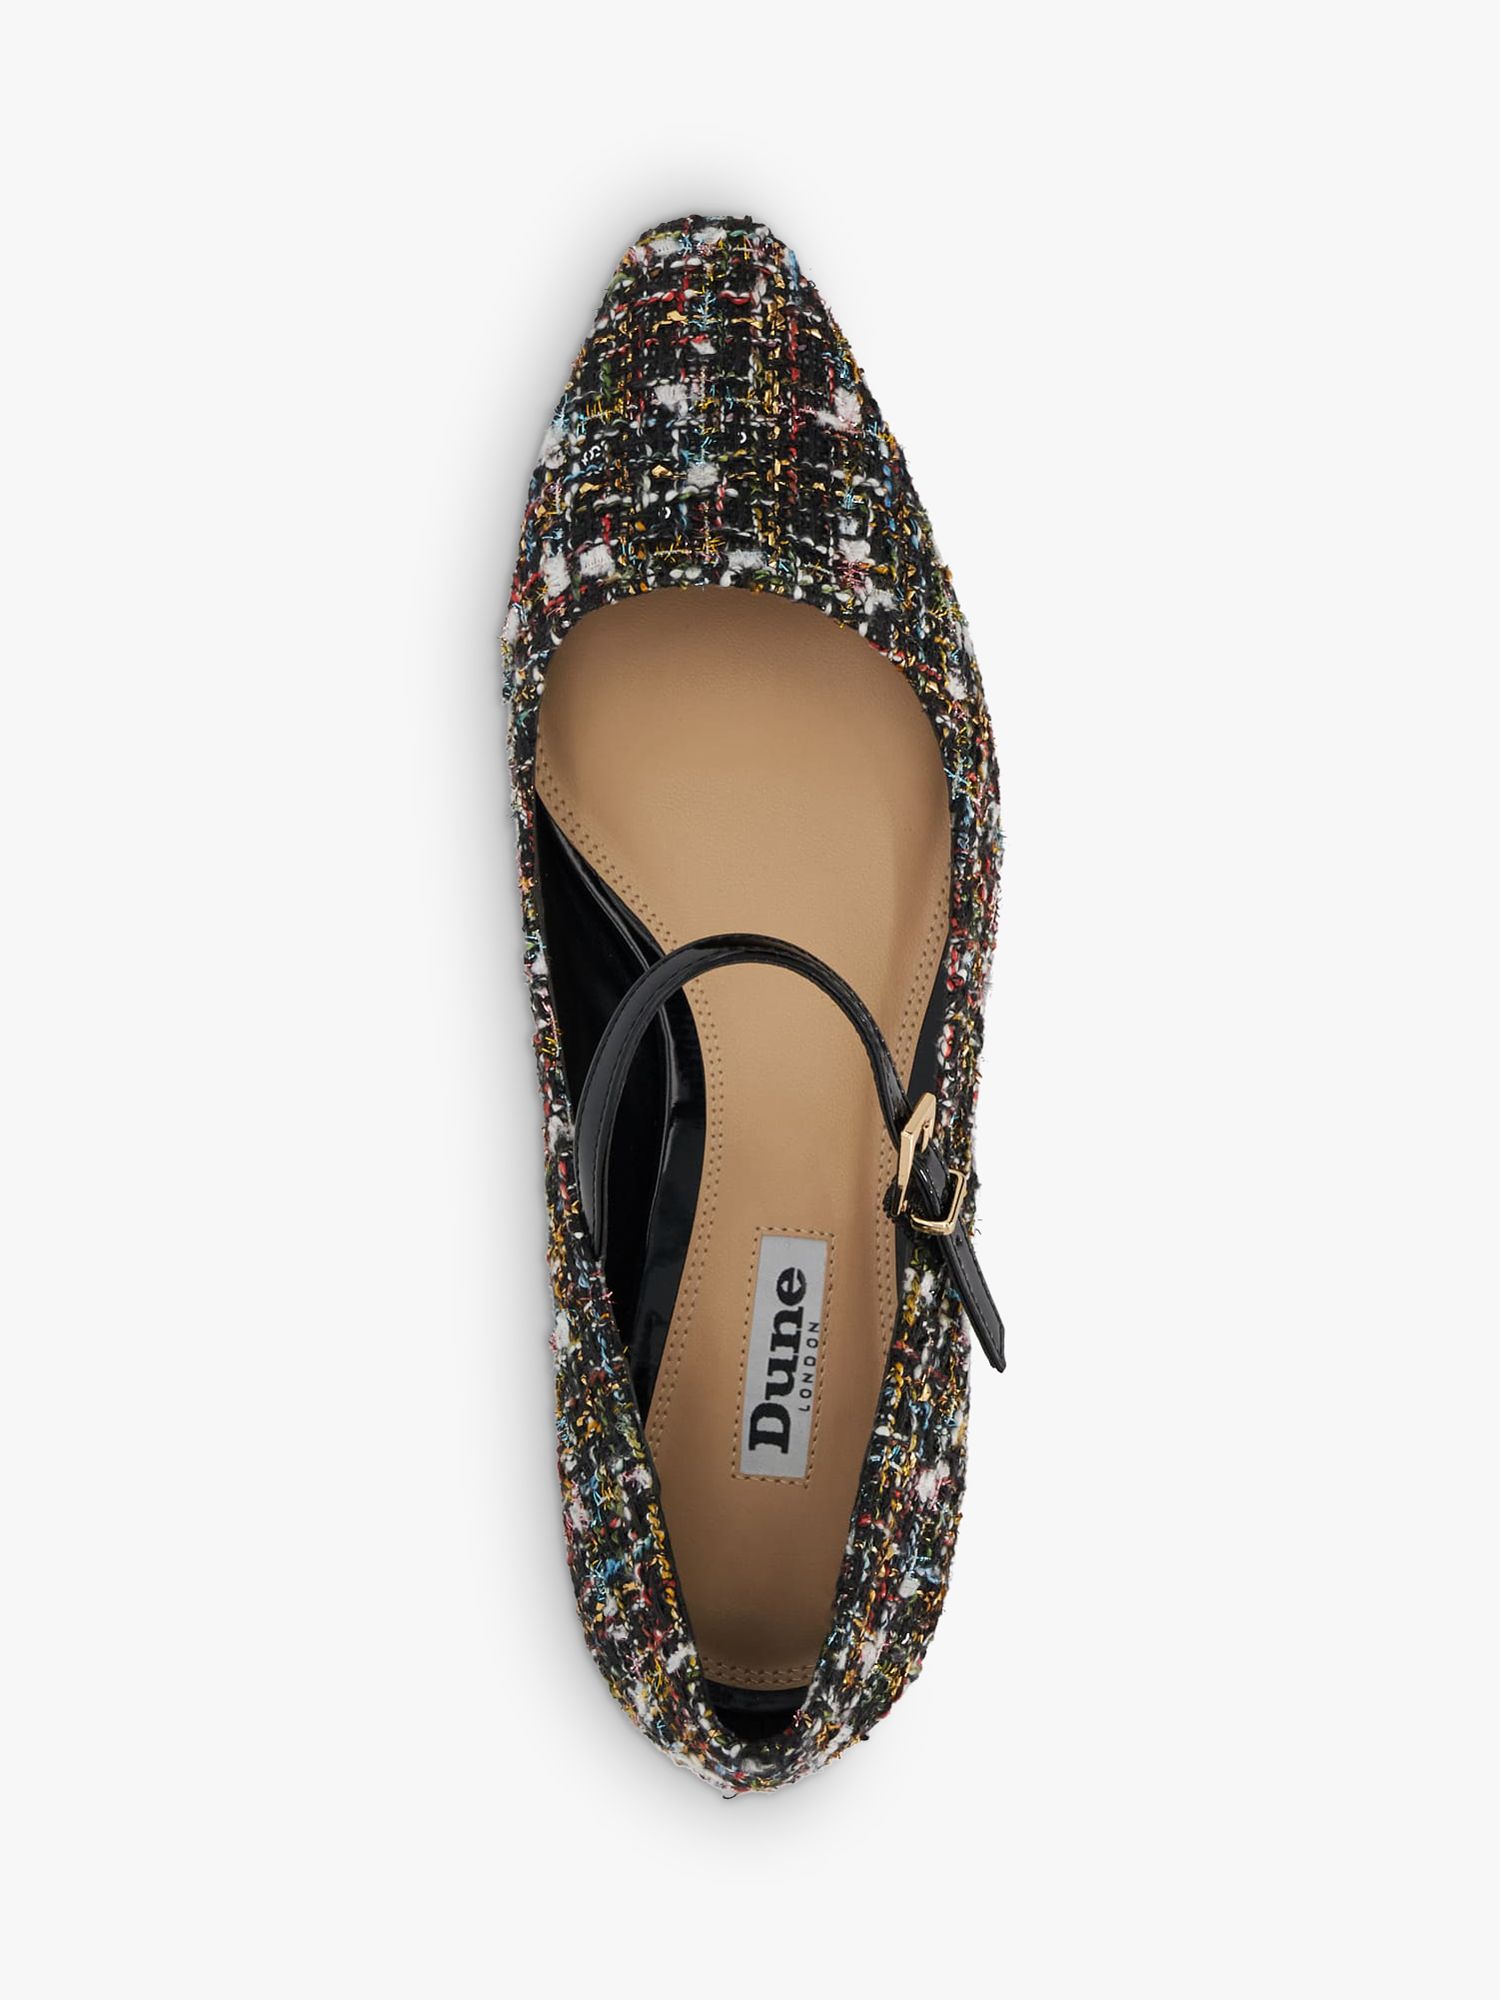 Buy Dune Halliee Fabric Mary Jane Shoes, Black Online at johnlewis.com